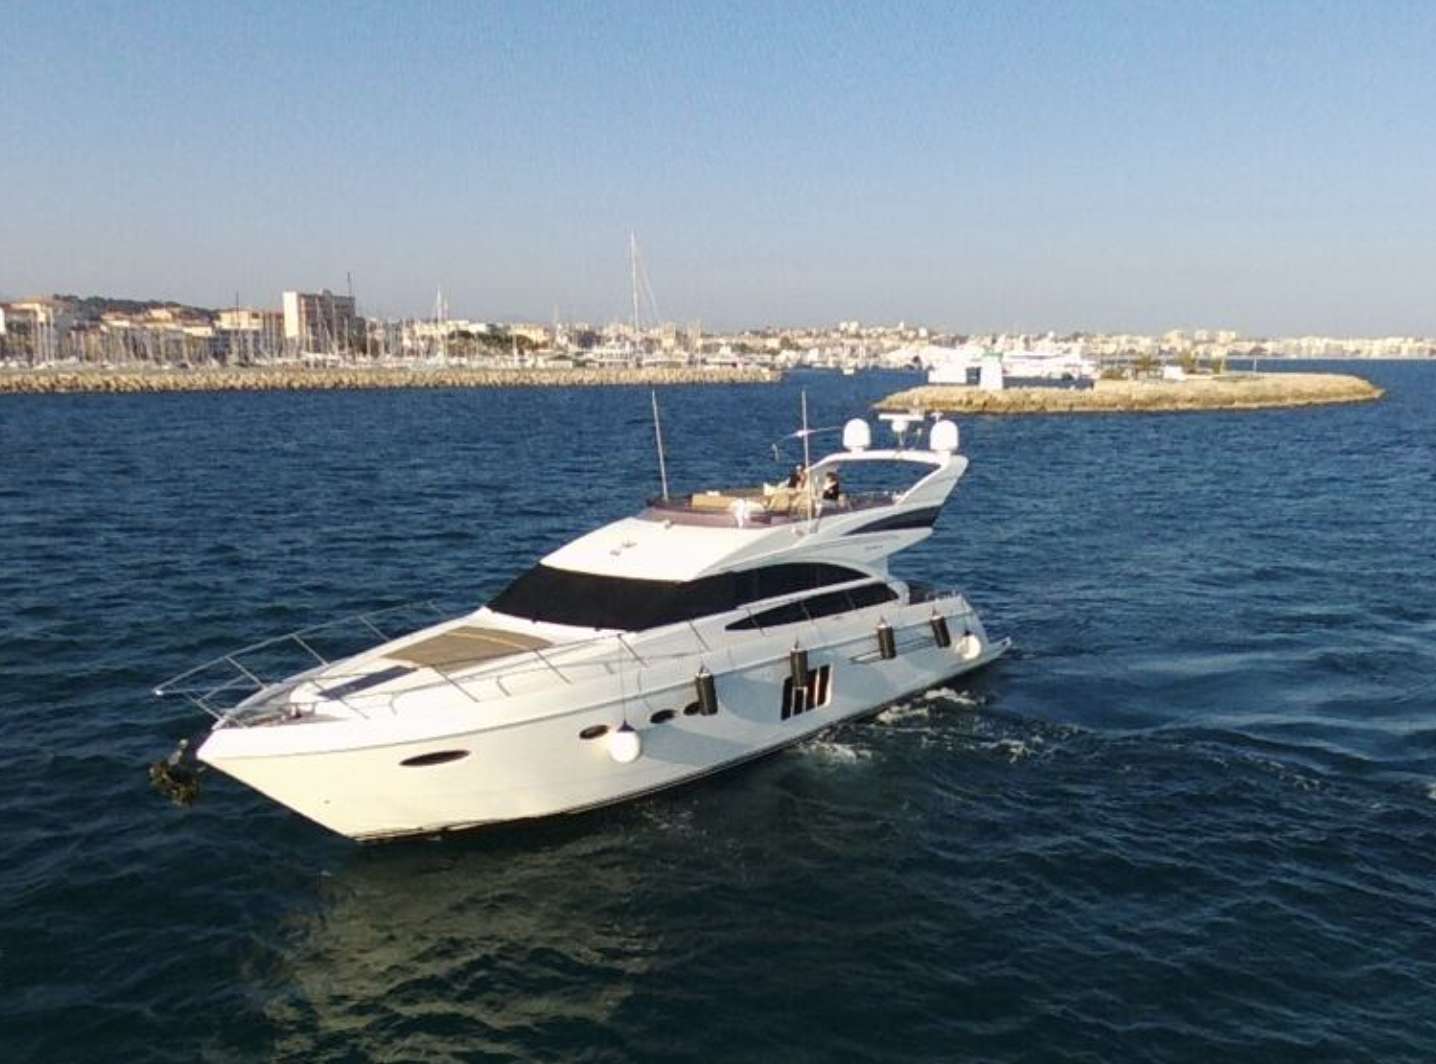 Princess 64 - Motor Boat Charter France & Boat hire in France French Riviera Frejus Port Fréjus 3